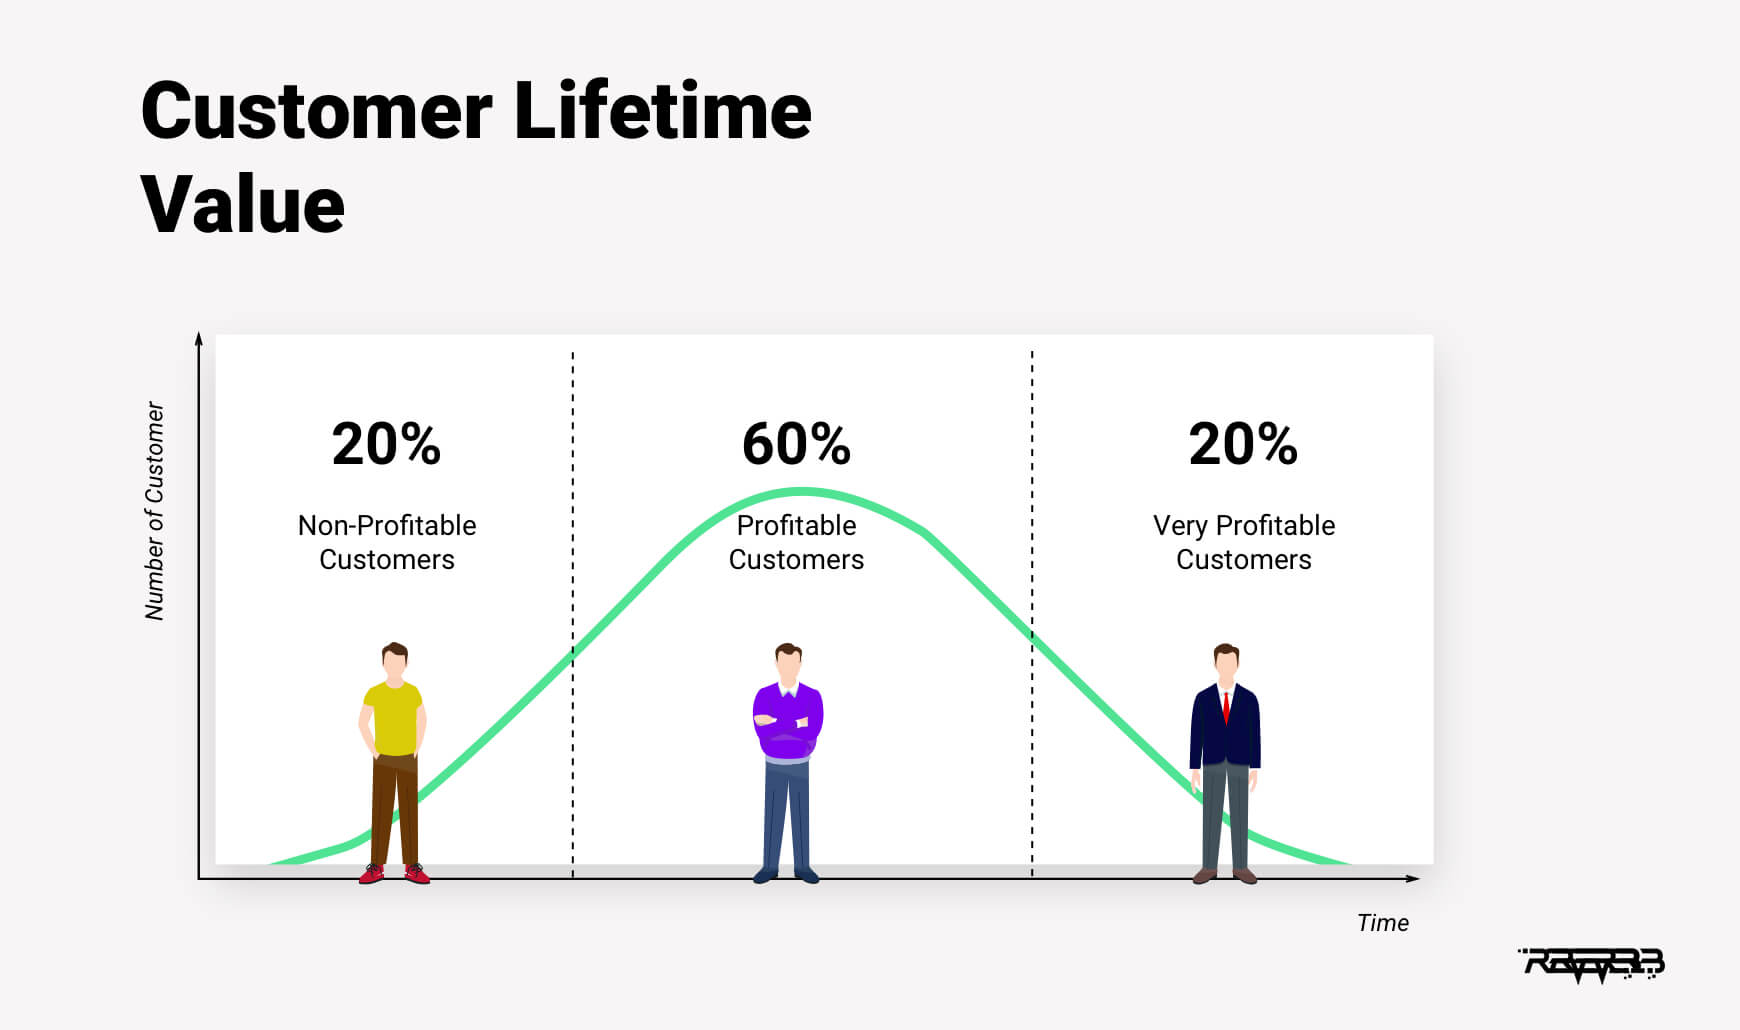 what is customer lifetime value